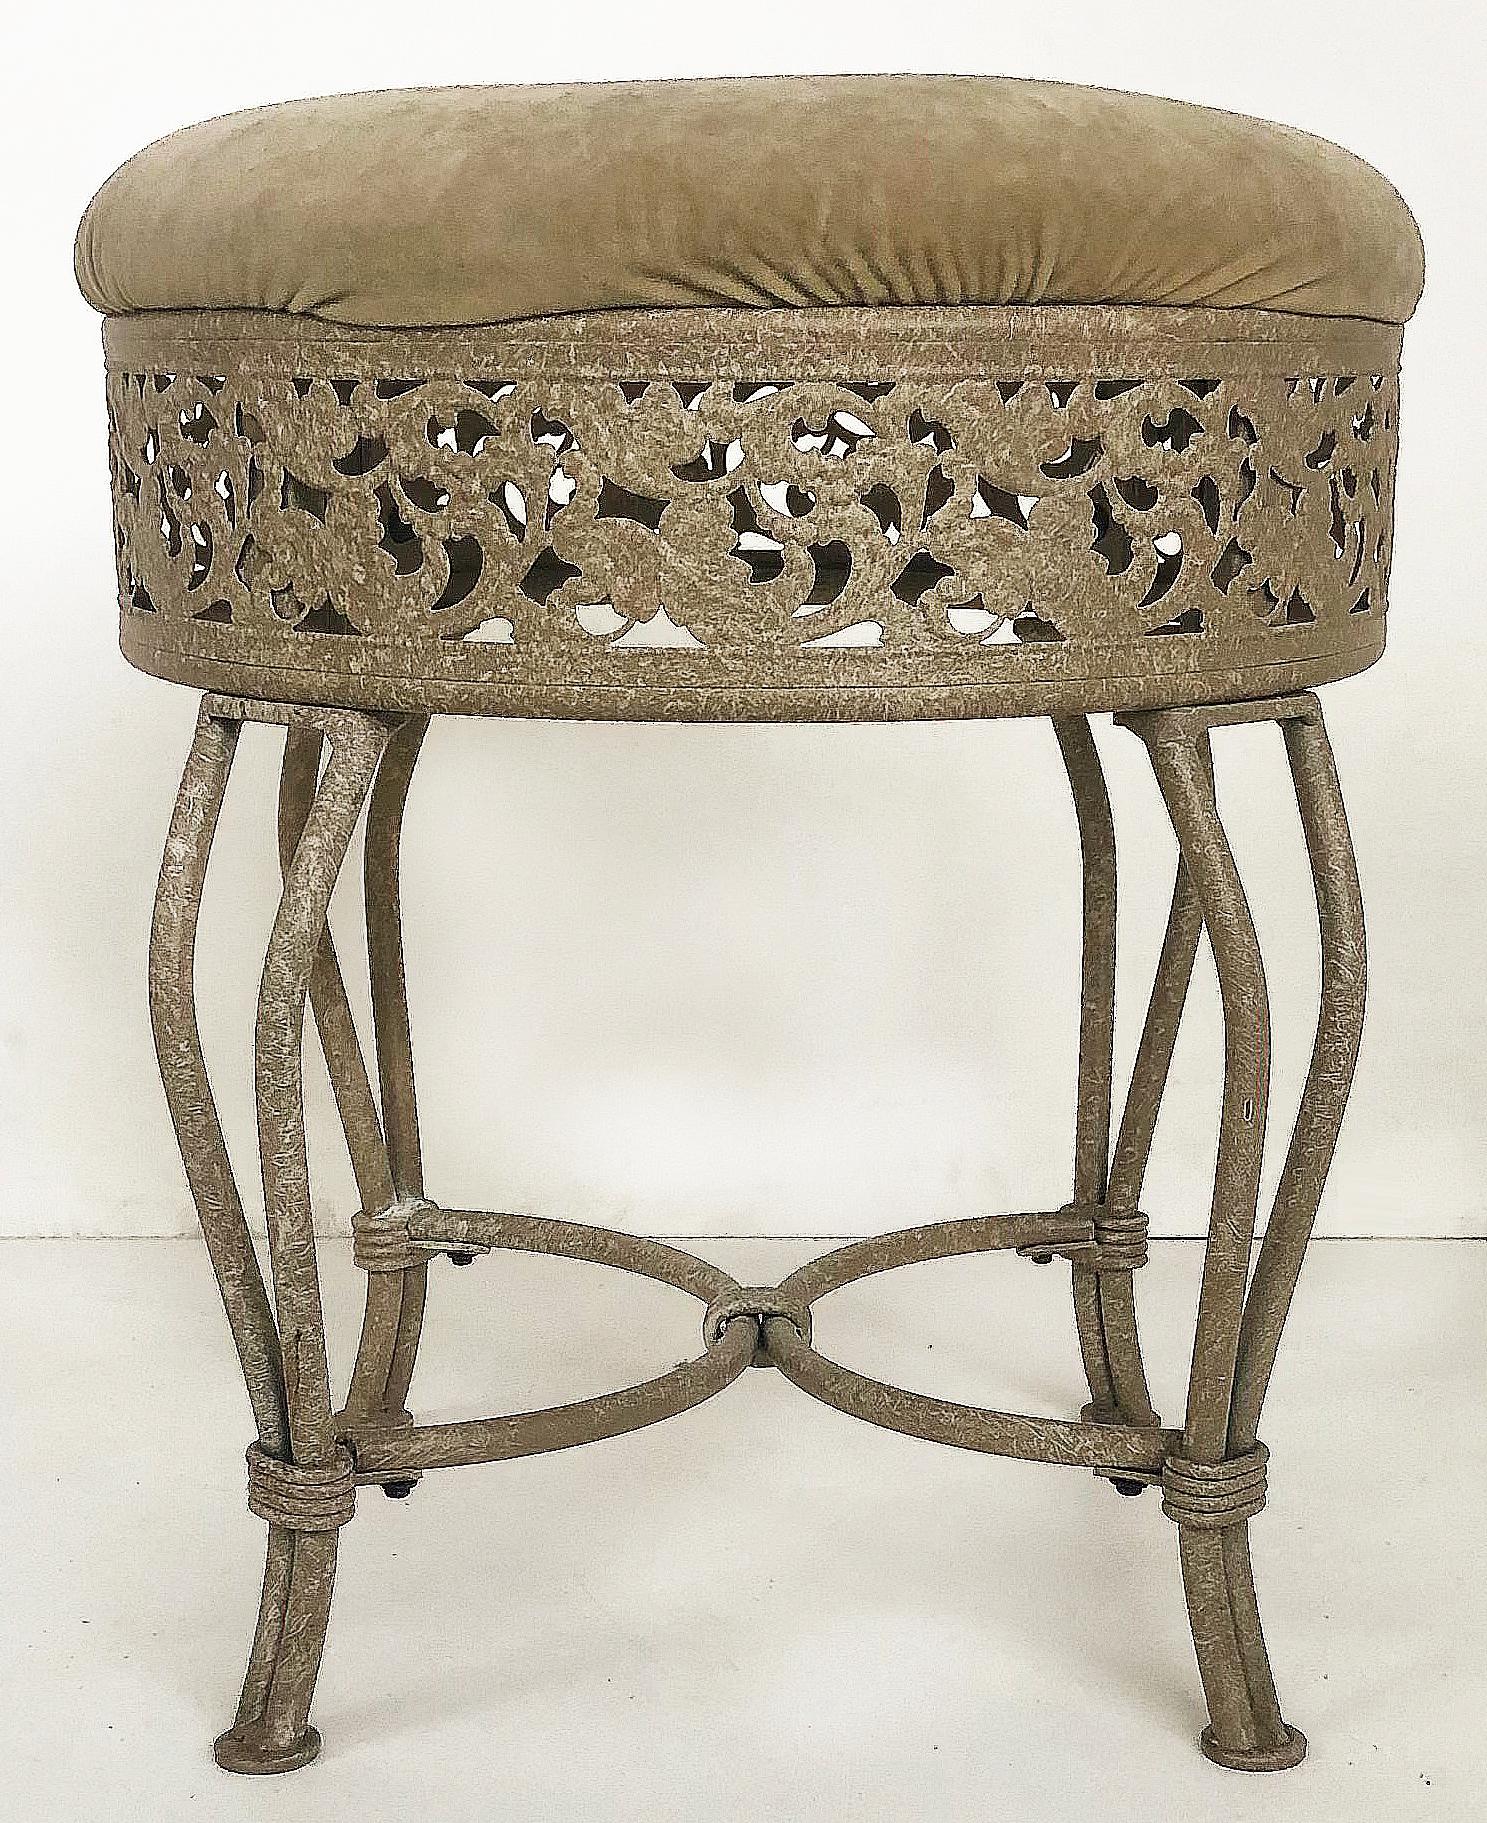 American Pierced Wrought Iron Painted Upholstered Low Stool, As-Found Upholstery For Sale